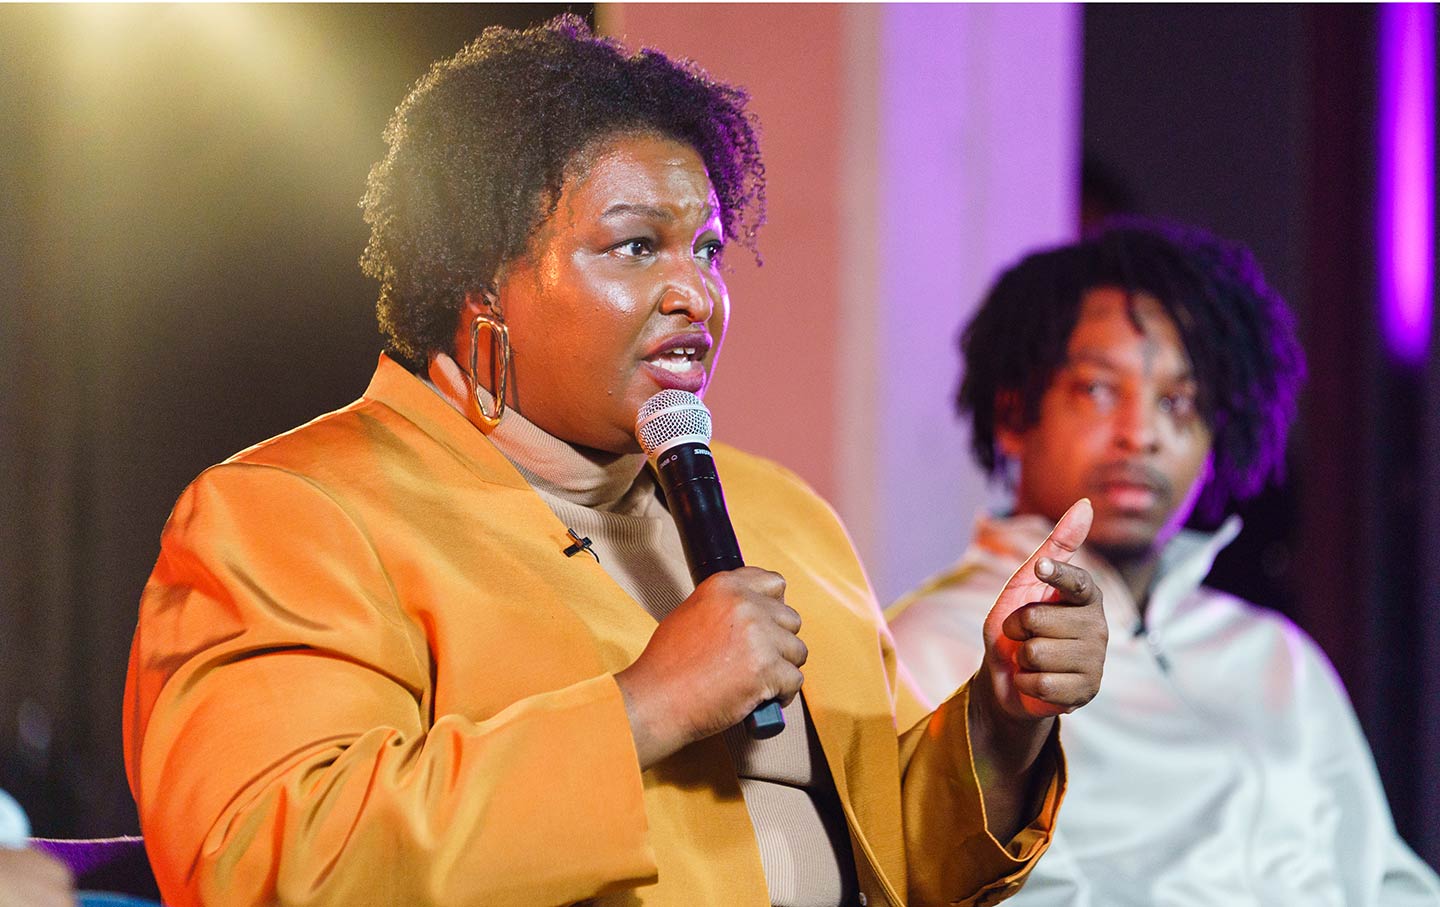 Stacey Abrams at a campaign event